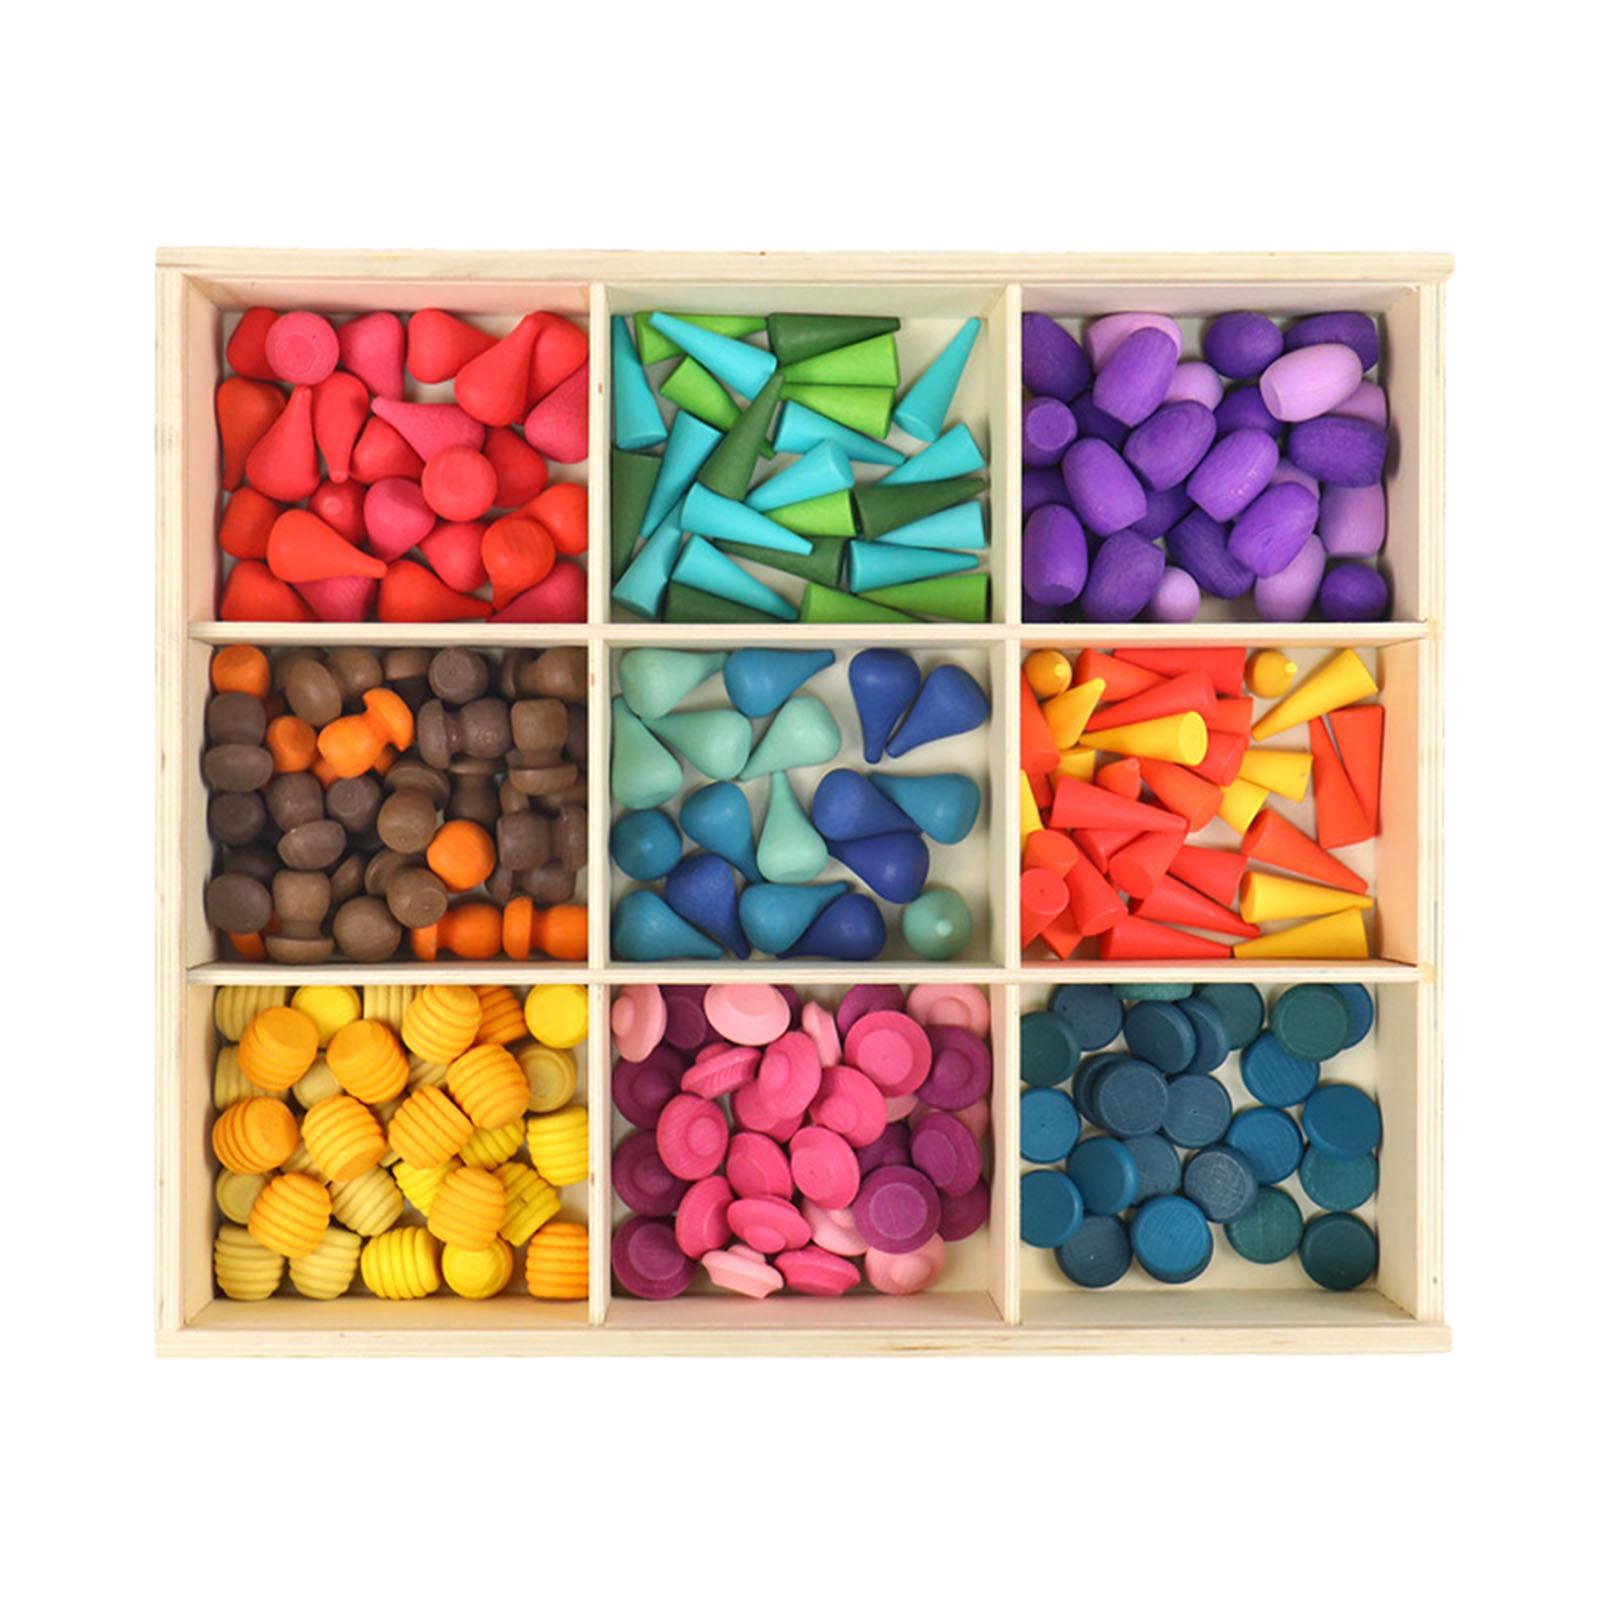 Wooden Rainbow Loose Parts Educational Play Set Colorful Waldorf Toy Montessori Stacking Blocks for Kids Toddler Preschool Baby